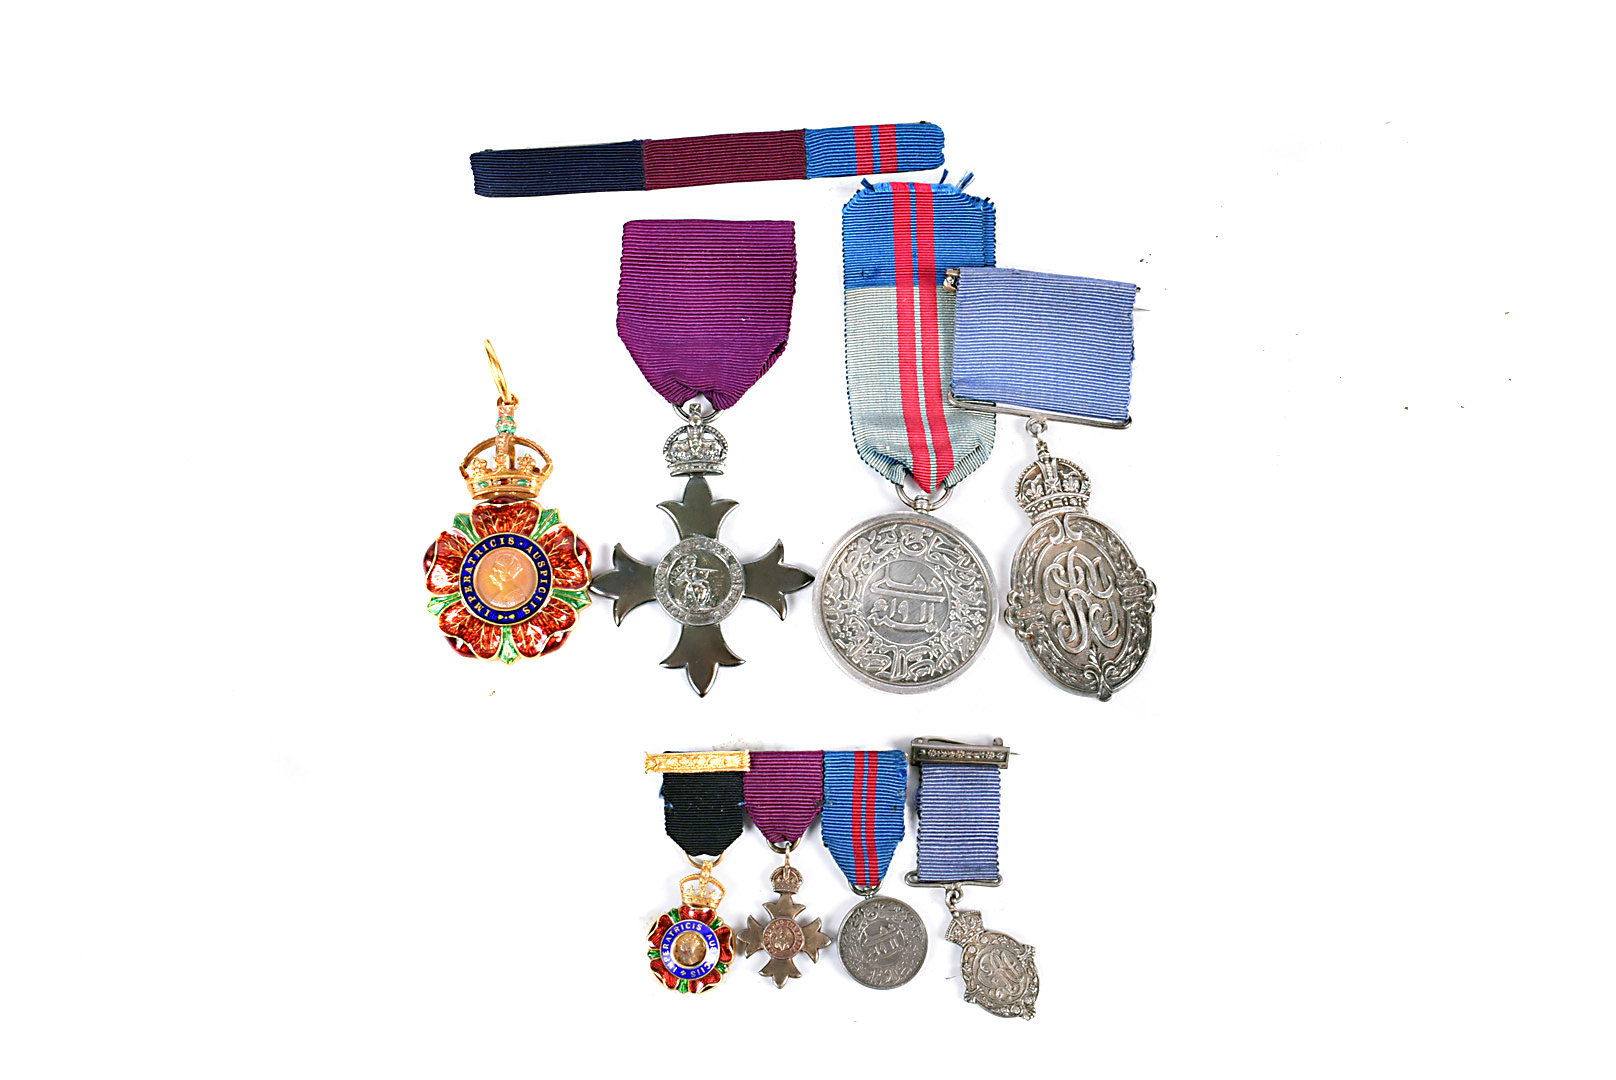 An Order of the Indian Empire medal group, awarded to William Hopkins (retired 1933), comprising